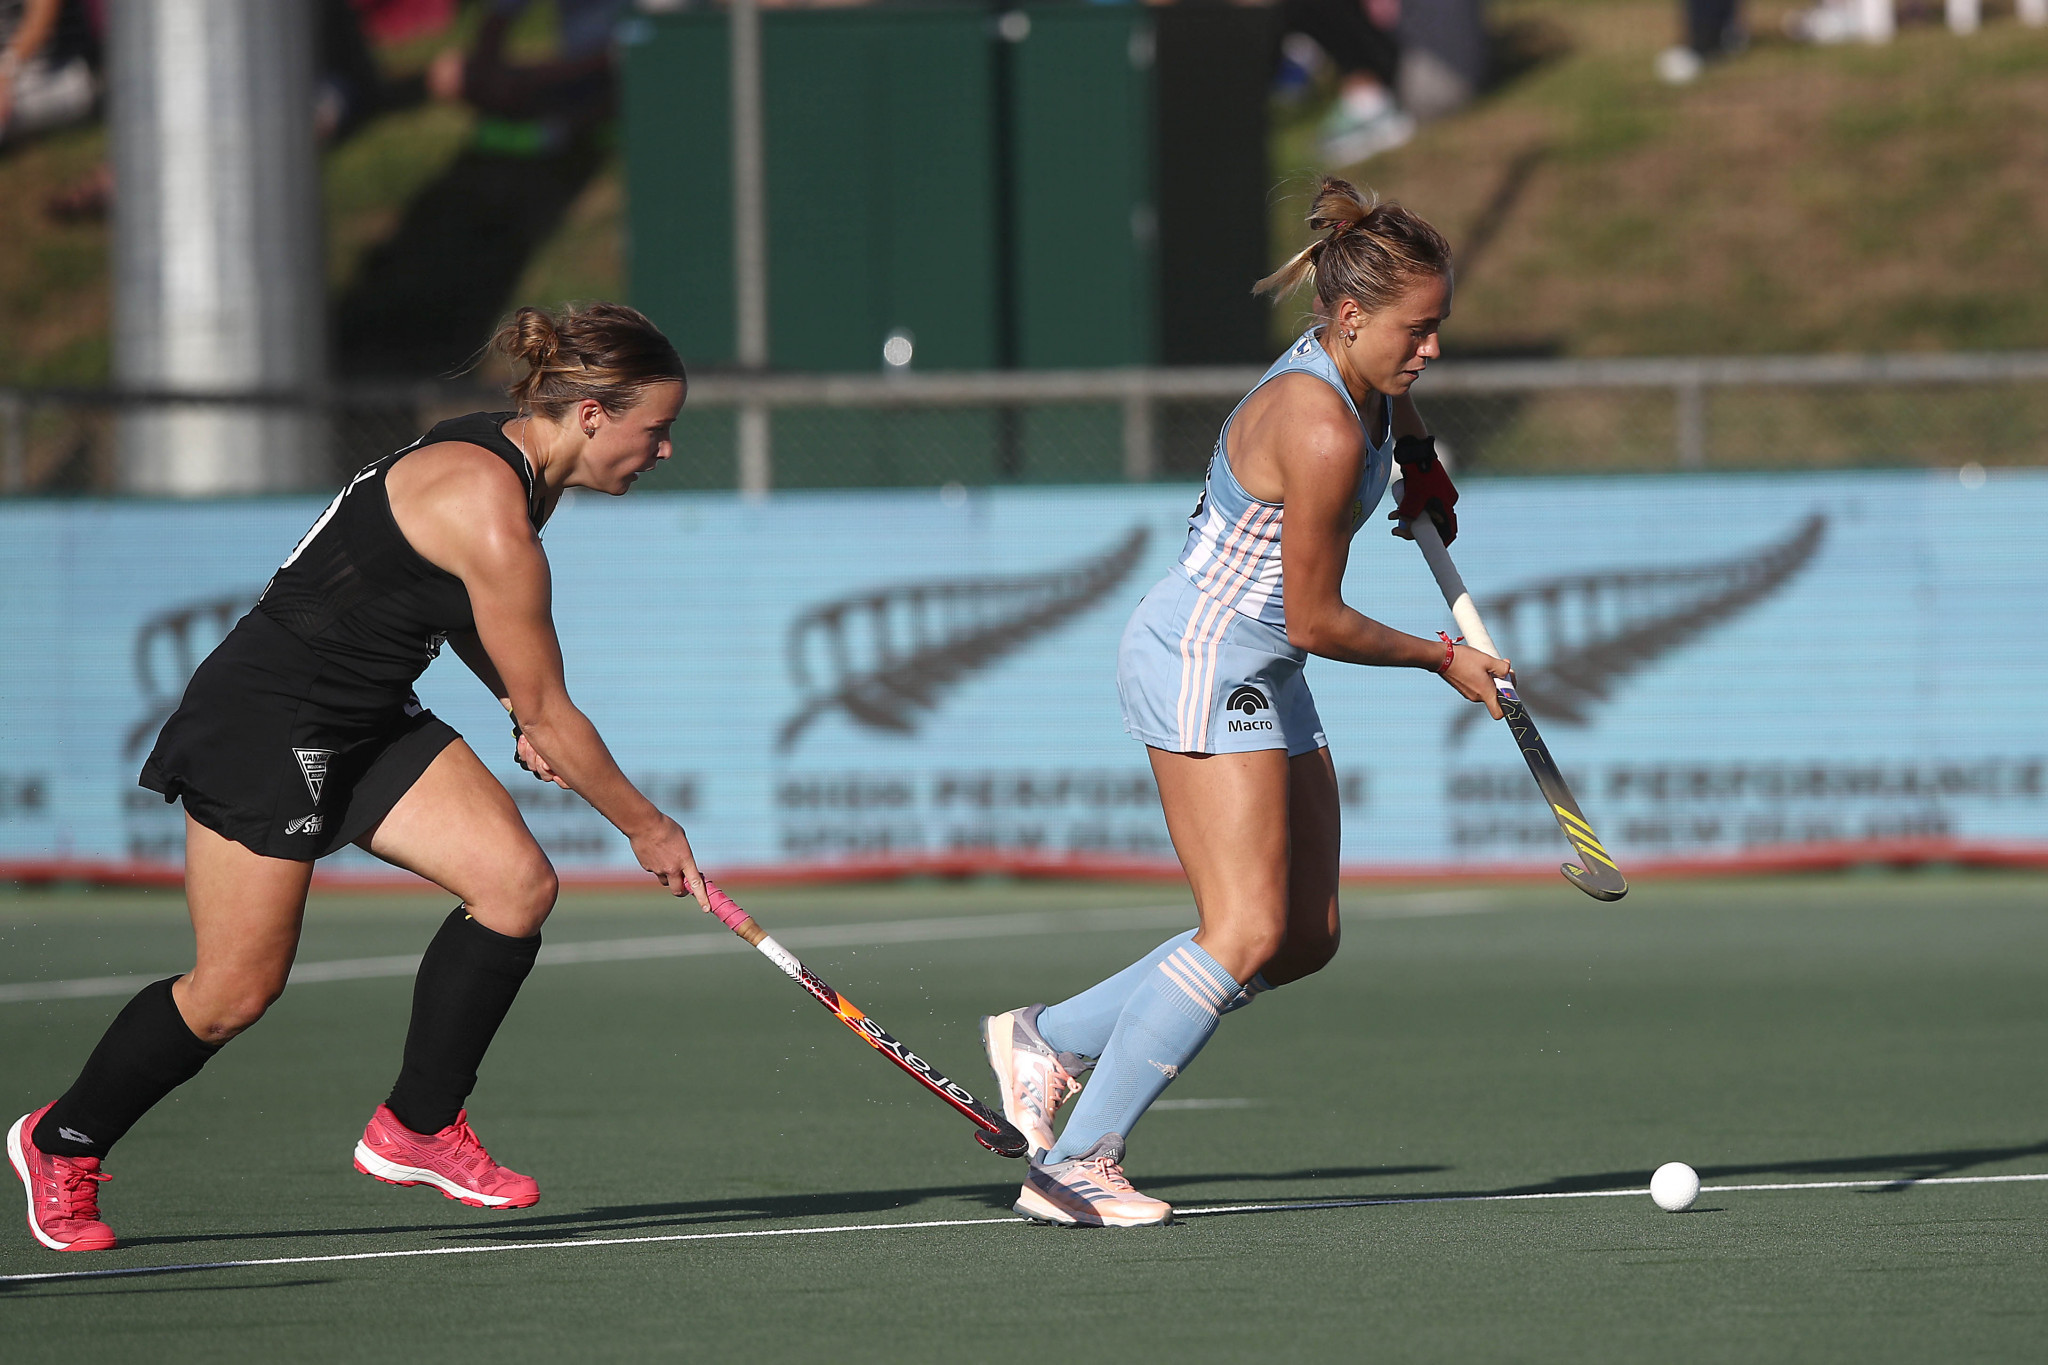 Argentina record two victories over hosts New Zealand in FIH Pro League